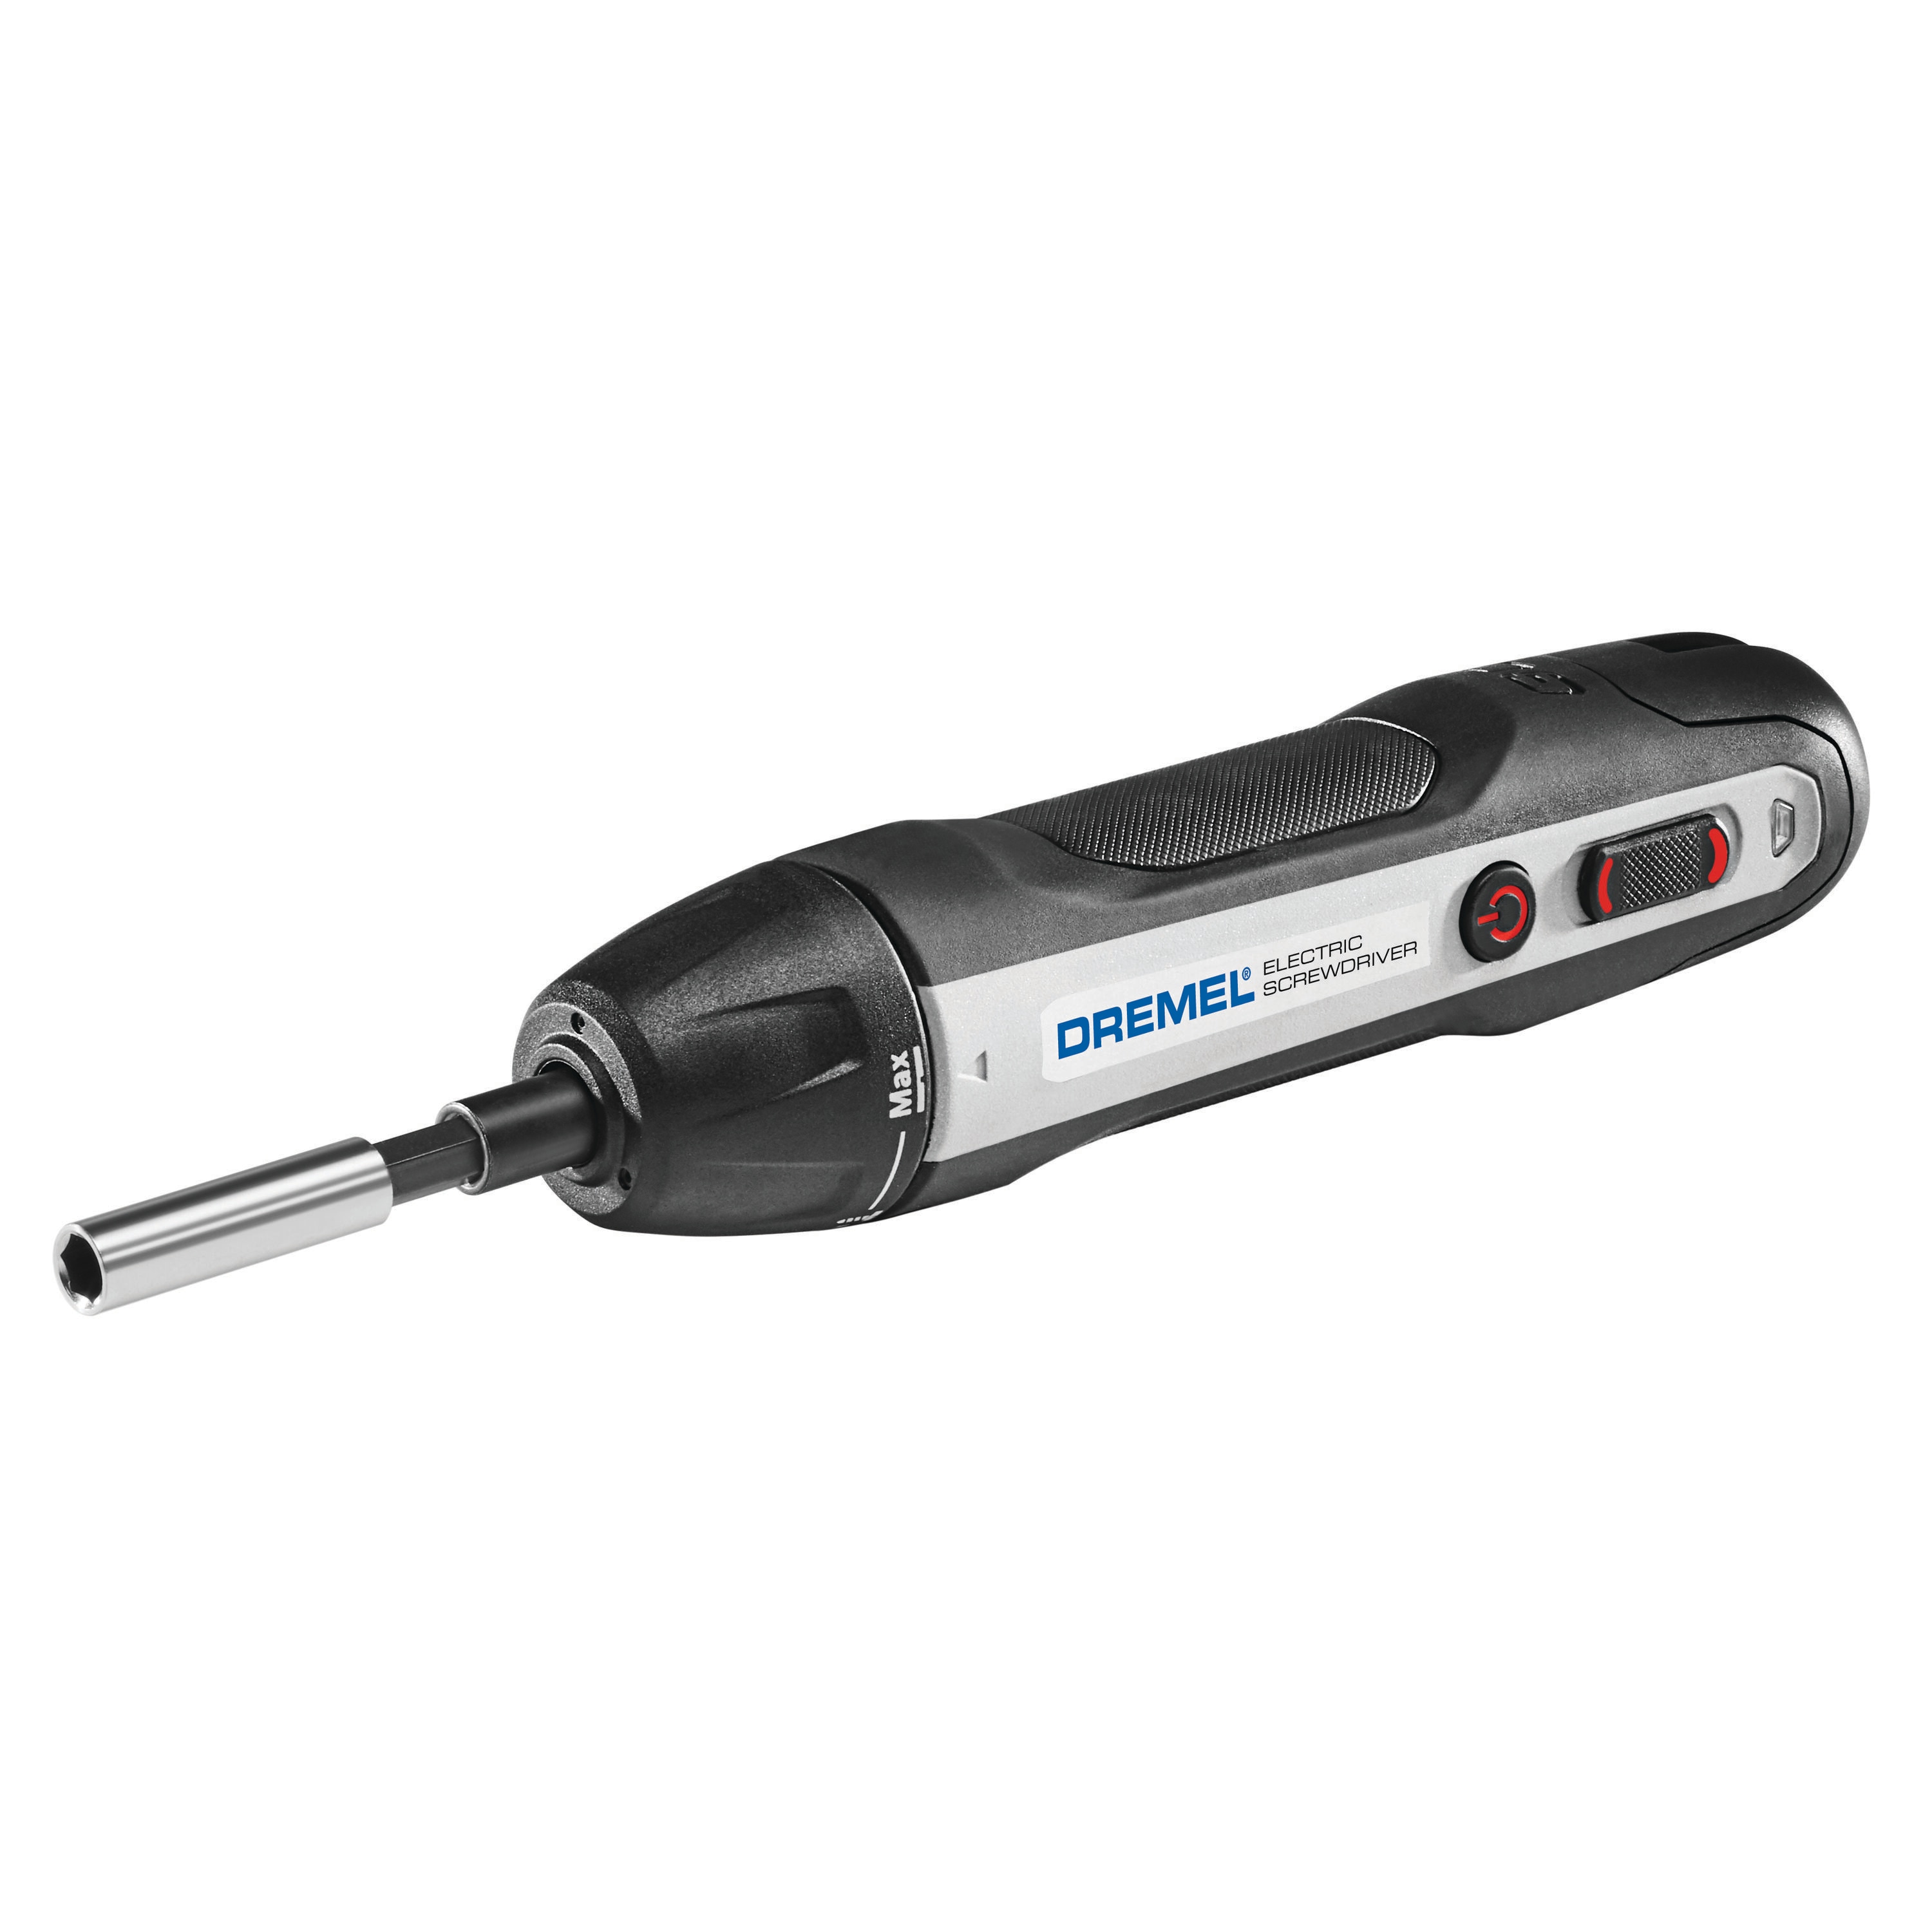 Dremel 4-volt 1/4-in Cordless Screwdriver in the Cordless Screwdrivers at Lowes.com